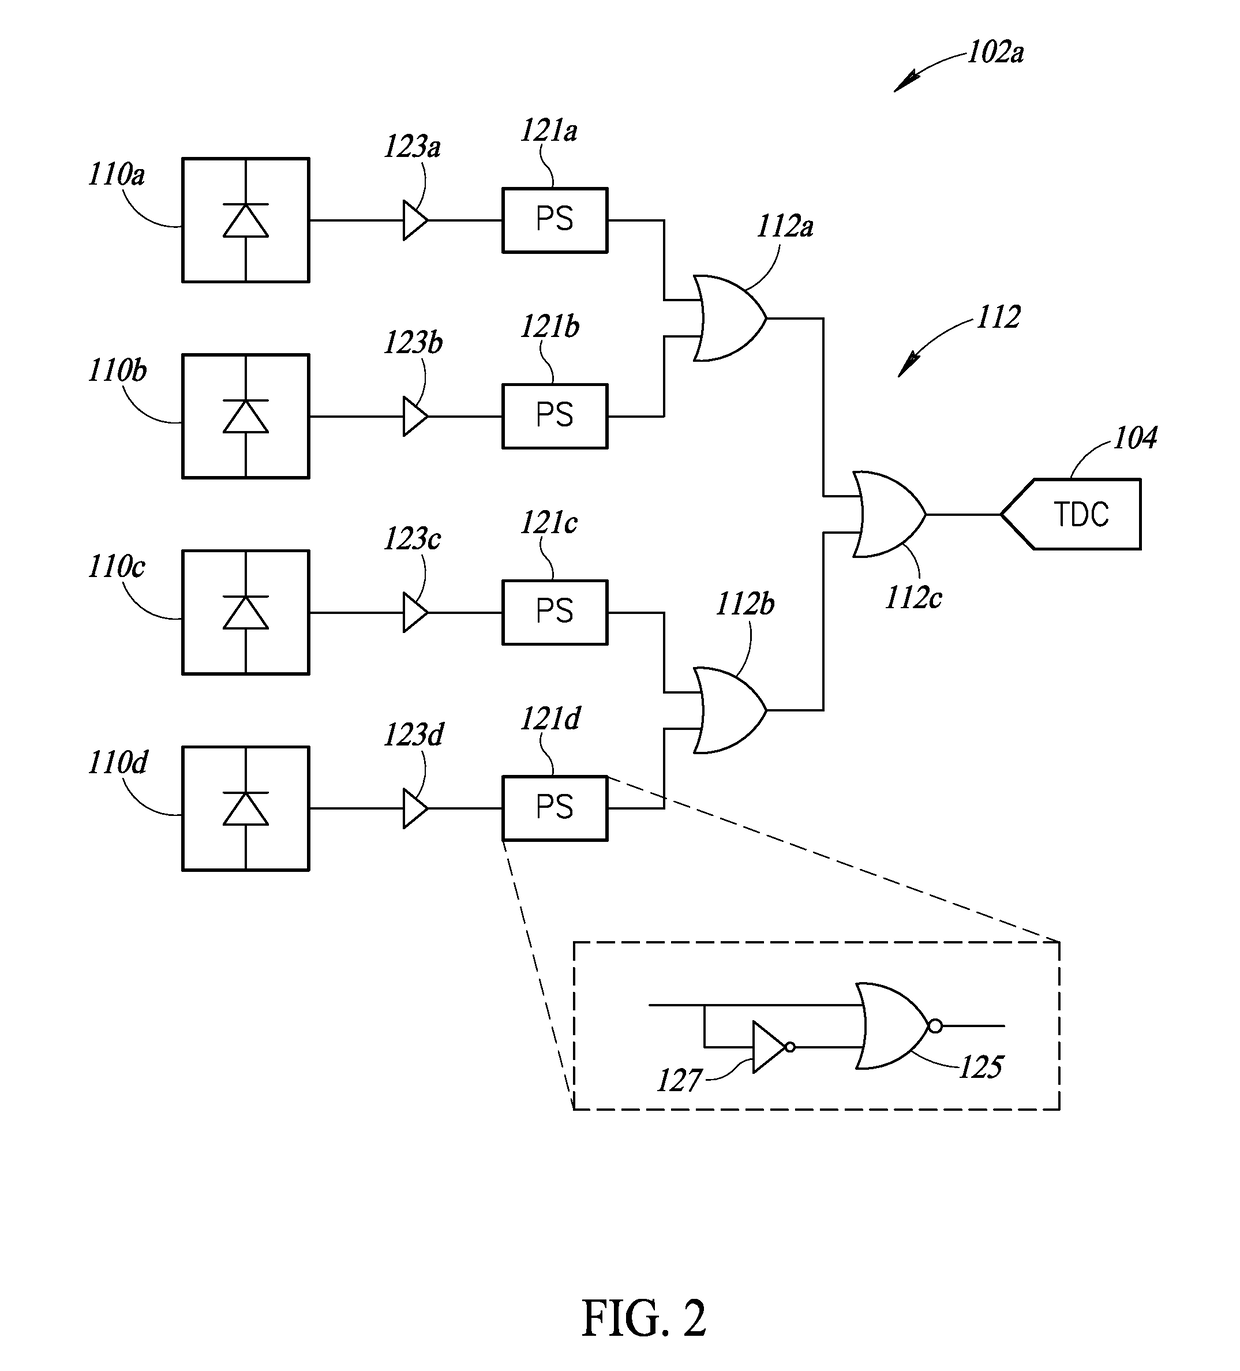 Light communications receiver and decoder with time to digital converters